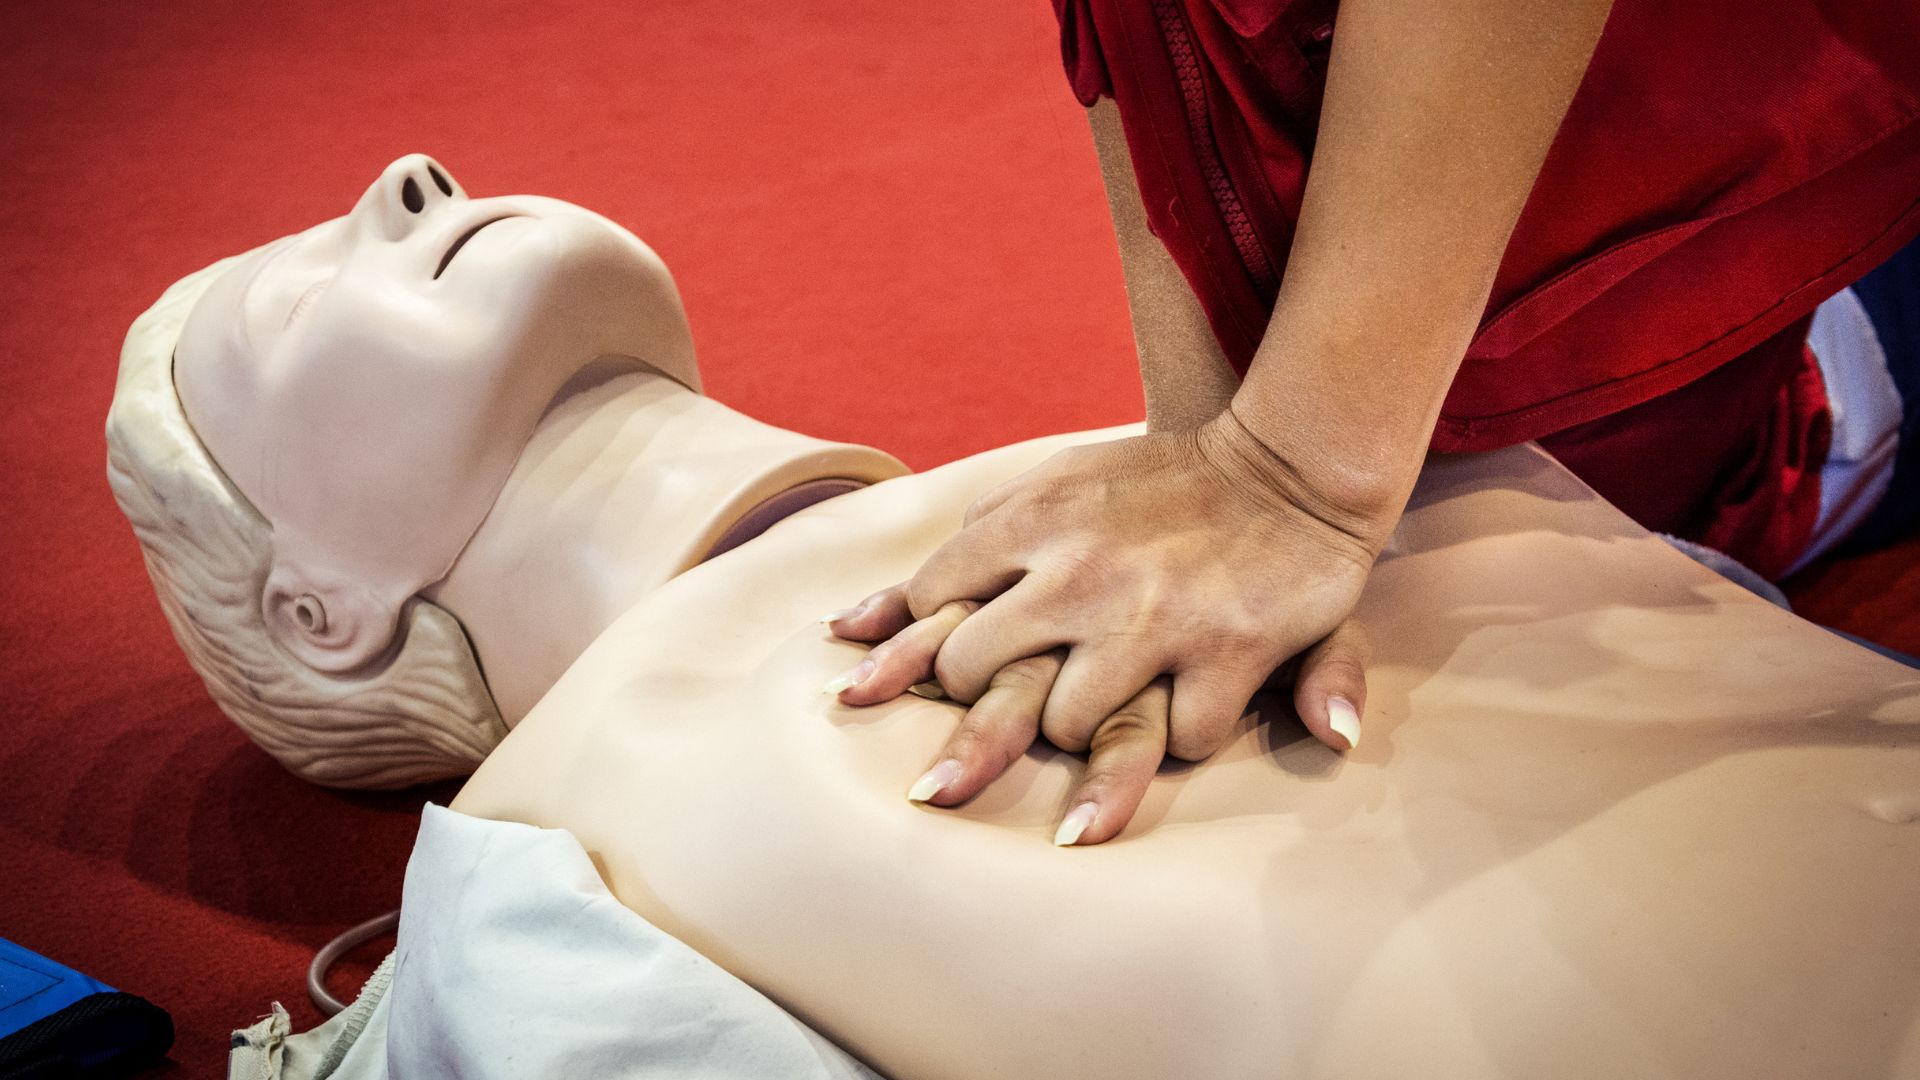 everything-you-should-know-about-cpr-training-costs-in-toledo.jpg